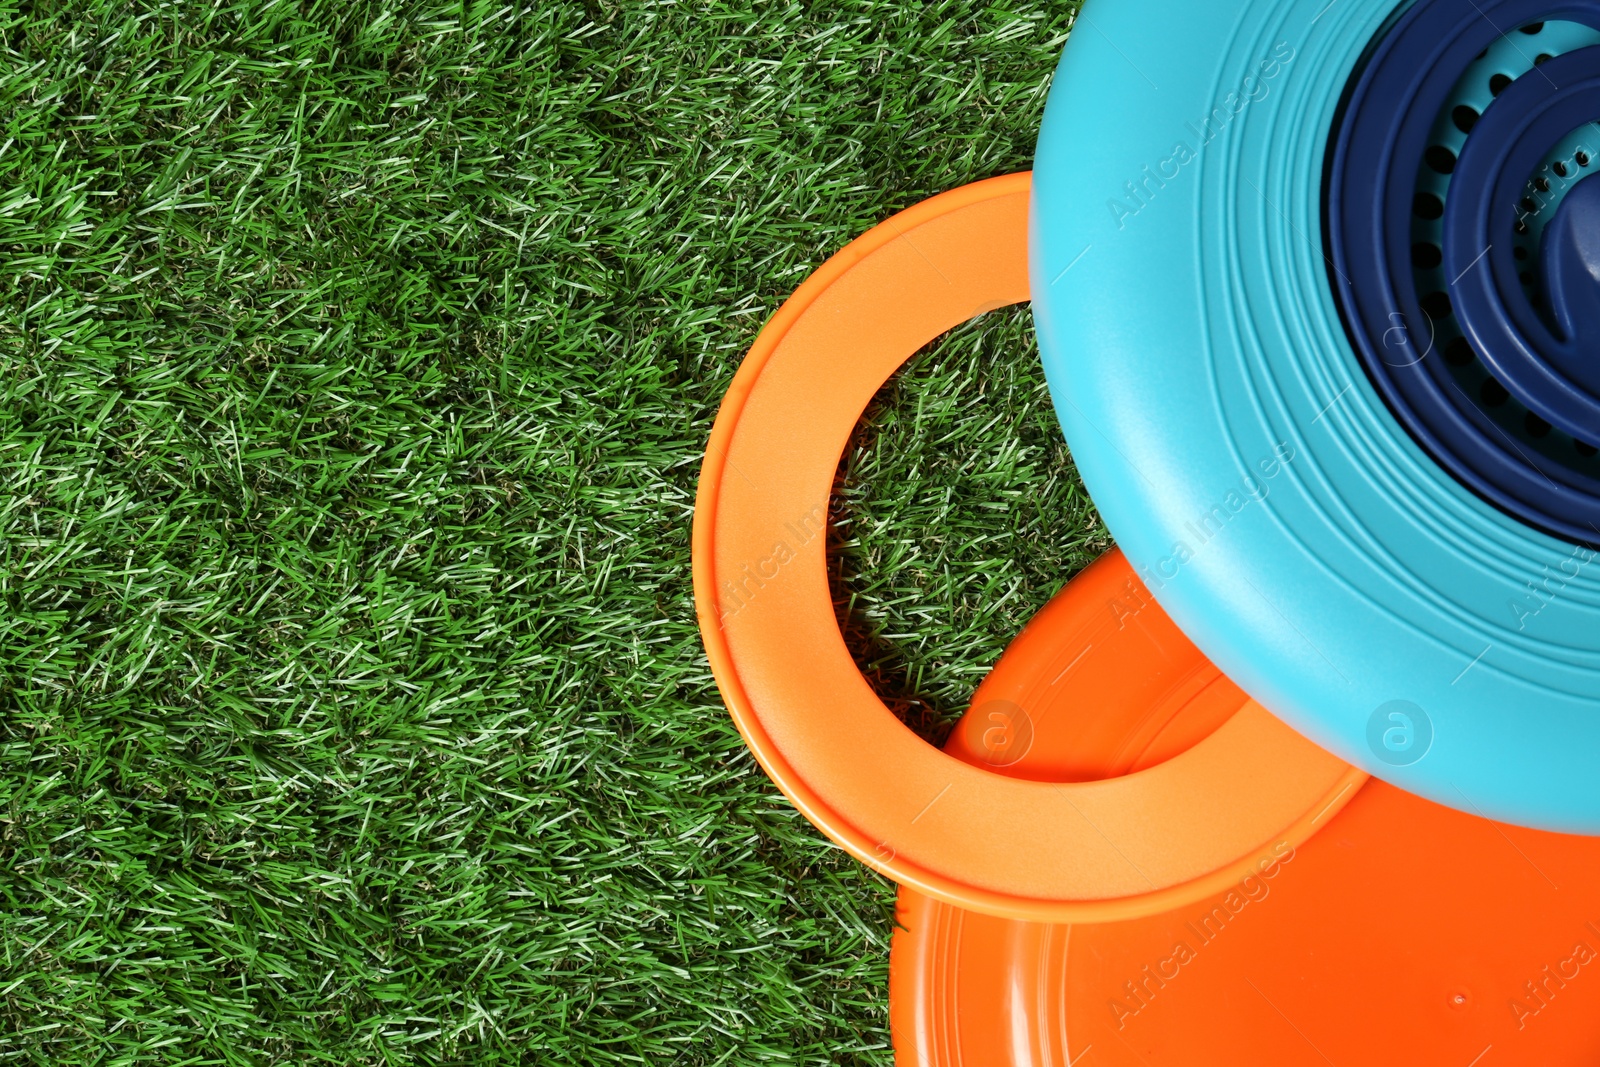 Photo of Plastic frisbee disks and ring on green grass, flat lay. Space for text